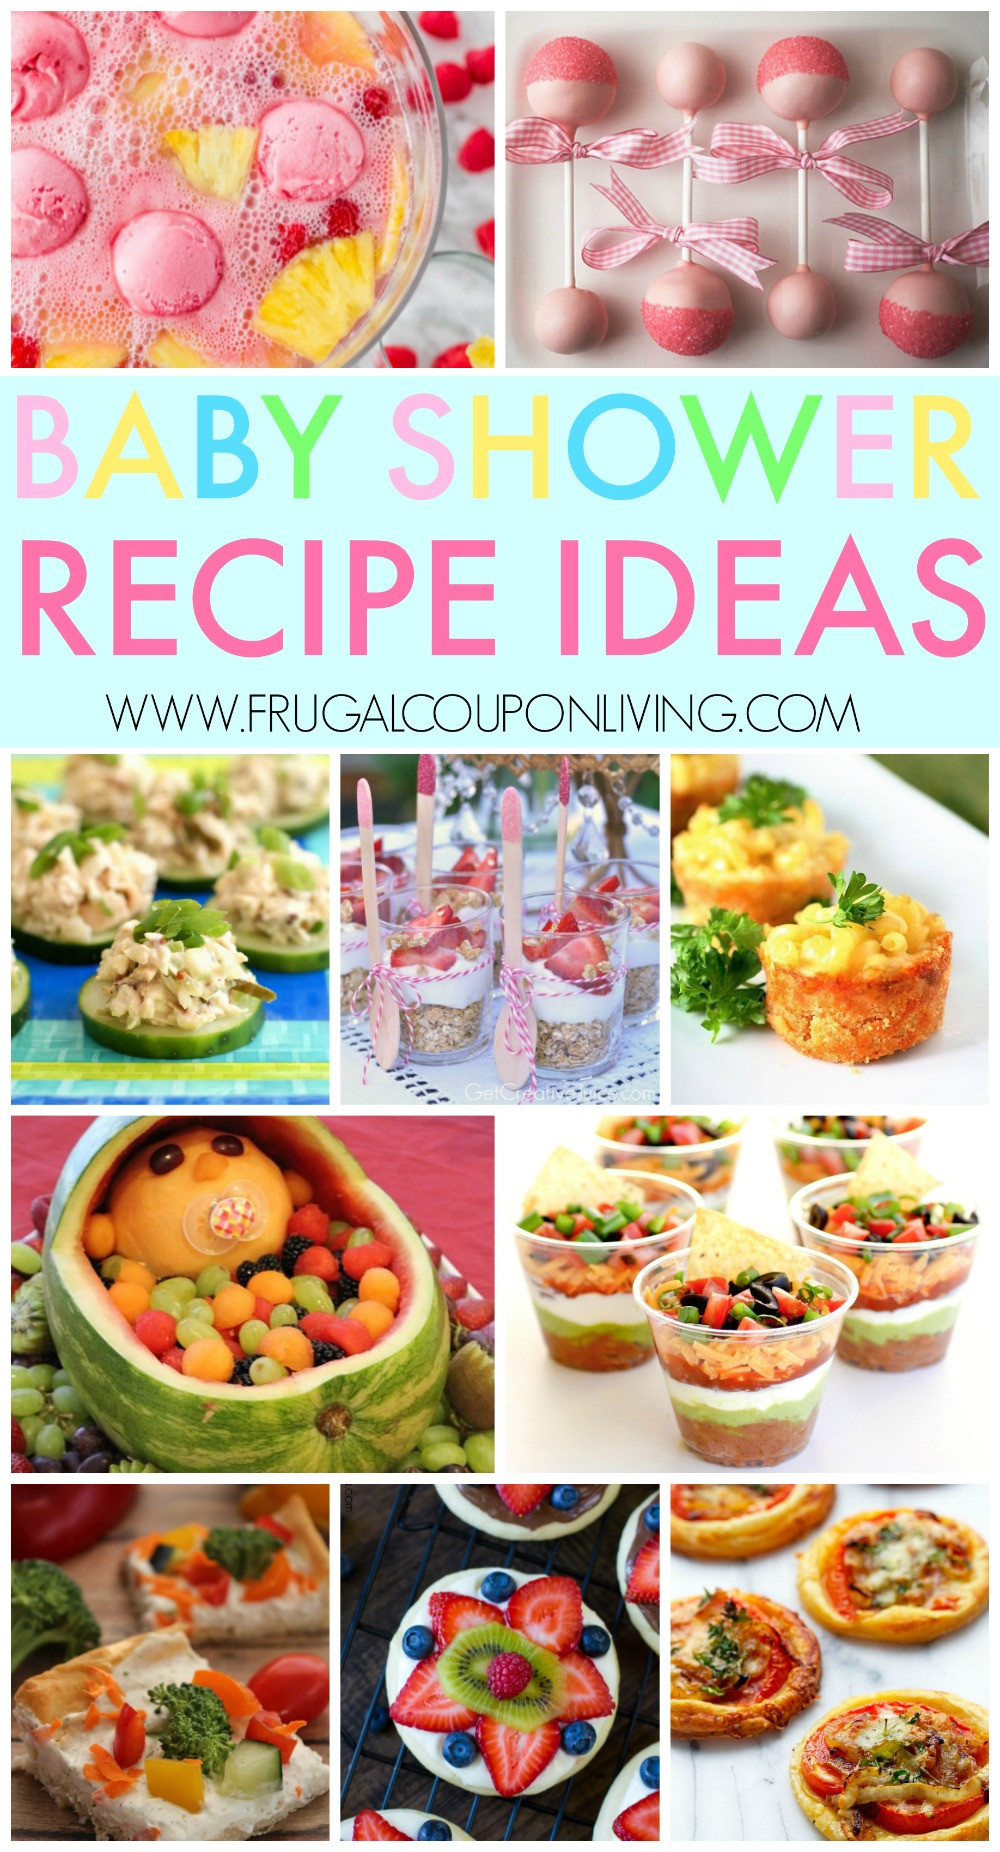 Recipes For Baby Showers
 Tips for Throwing a Baby Shower